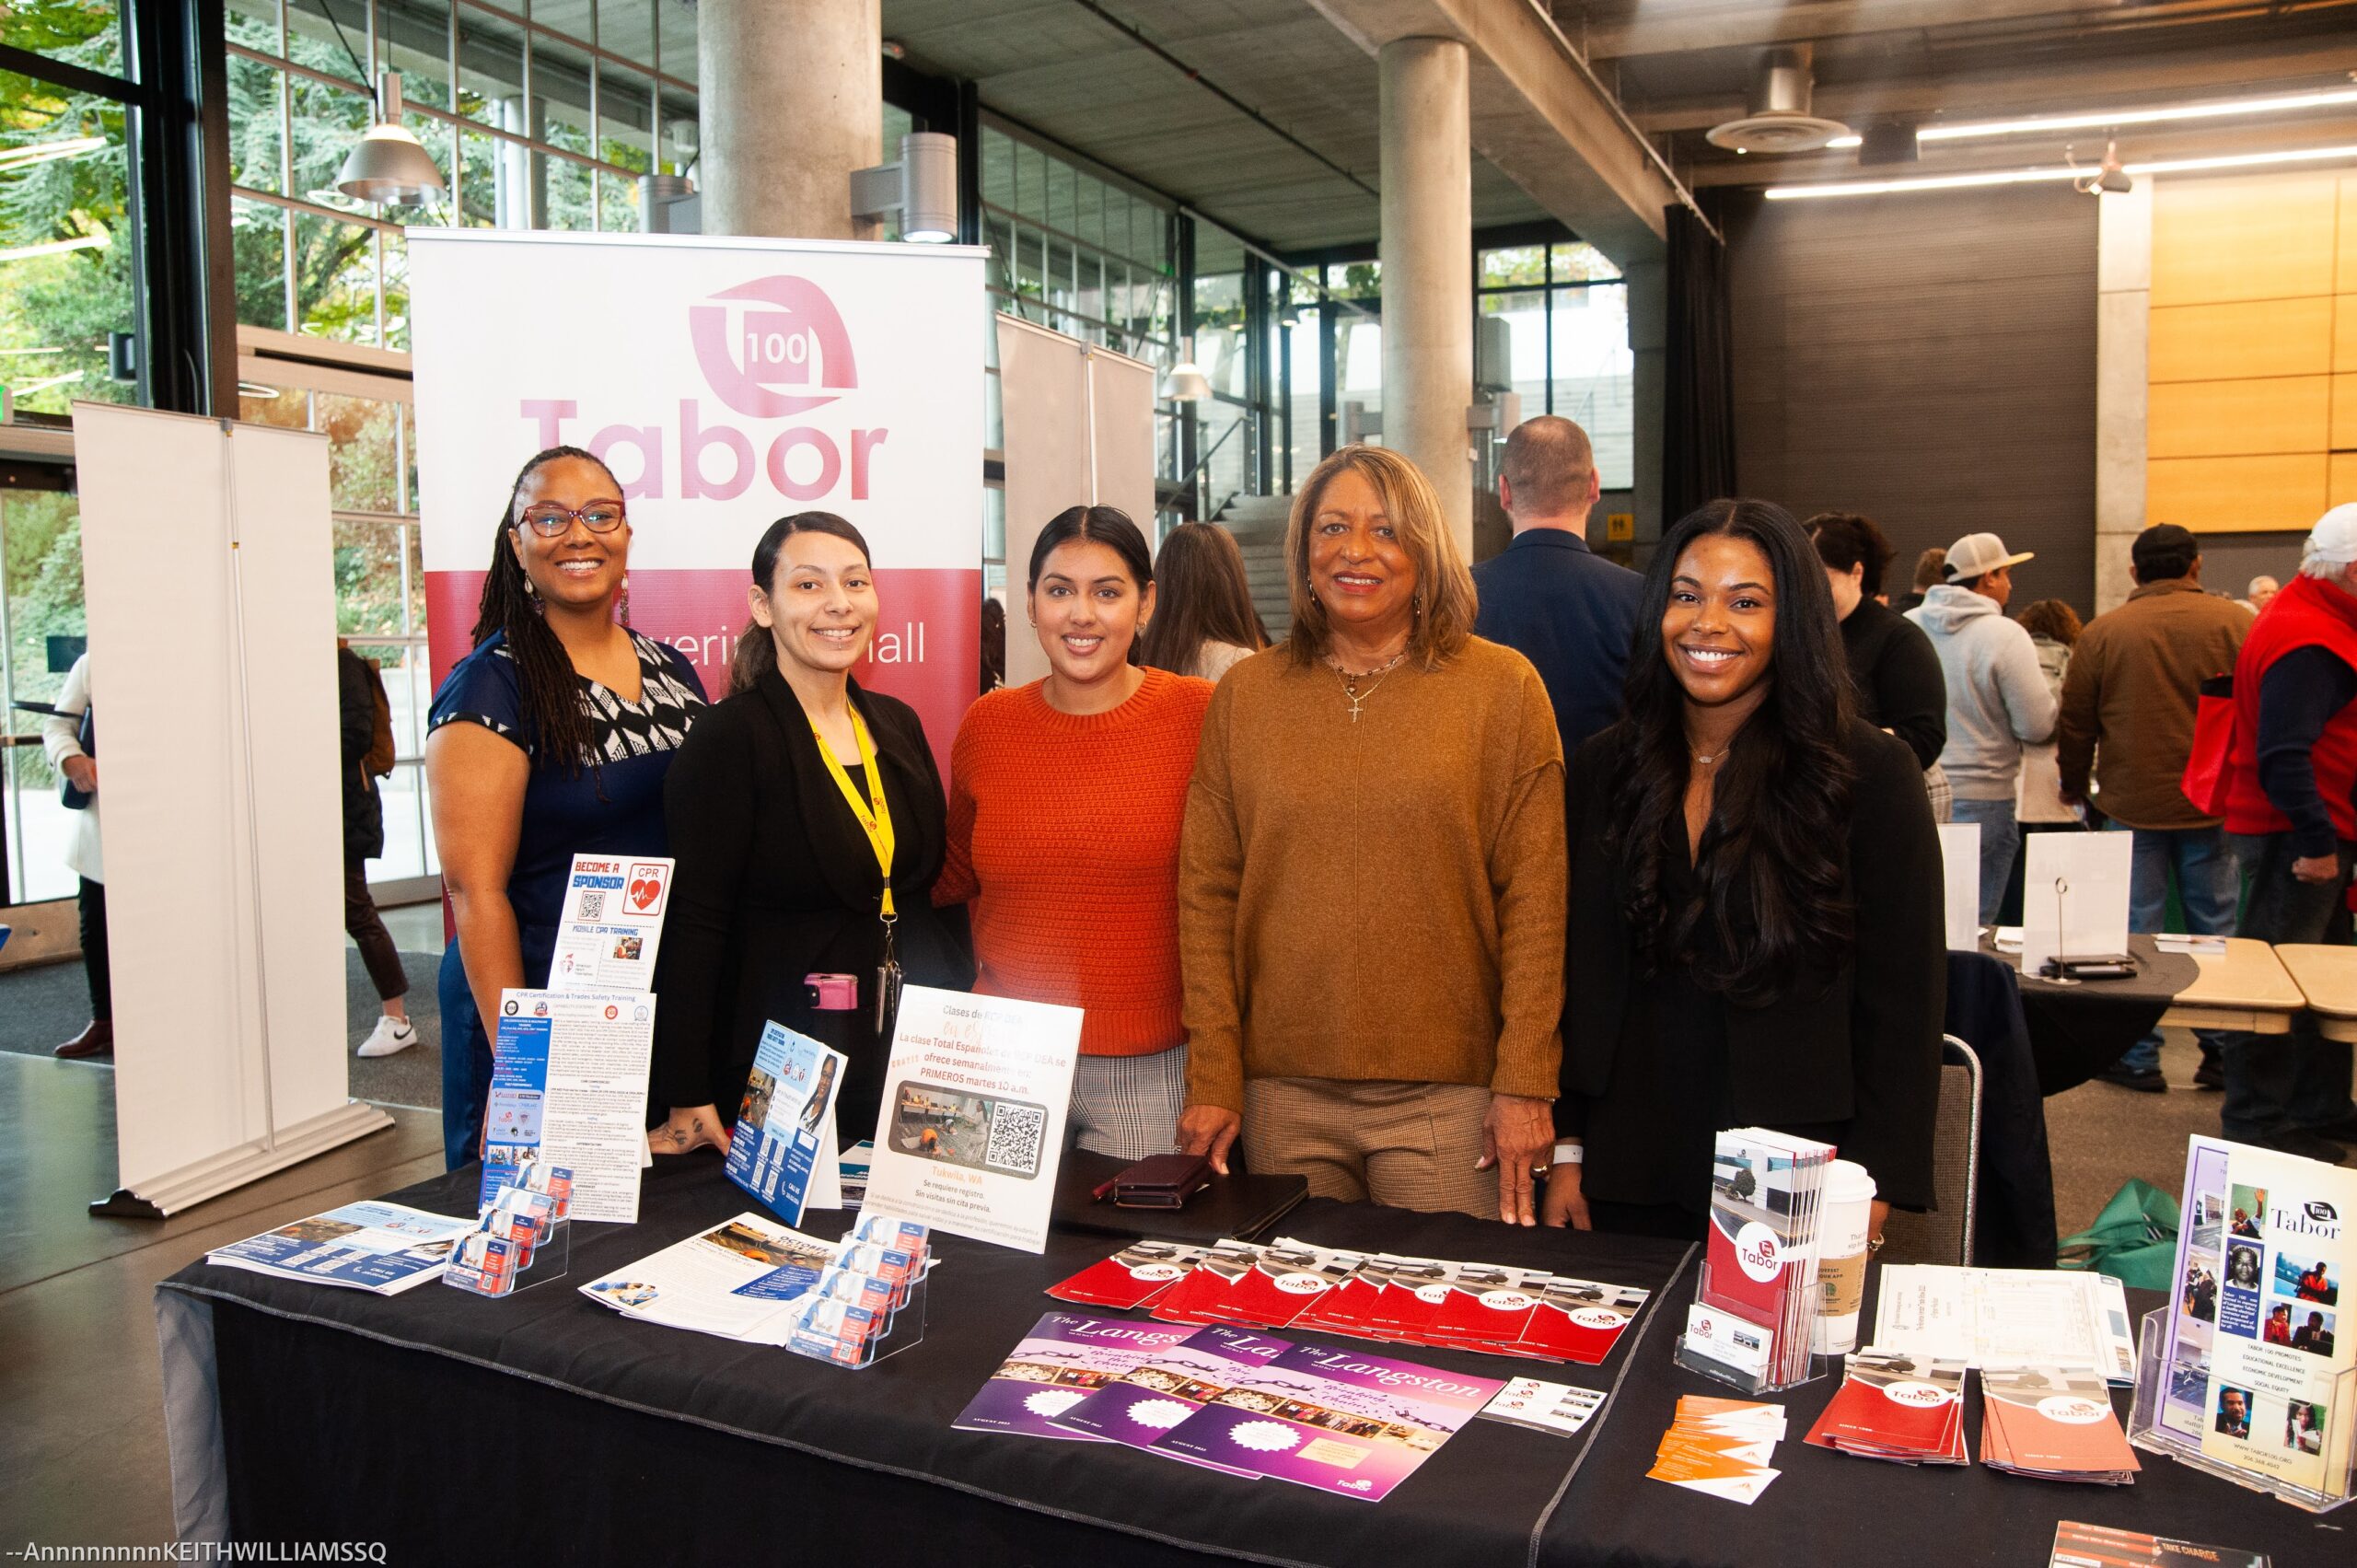 A group of five women smile for a photo behind a table full of pamphlets and hand-outs. A sign behind them has the Tabor 100 logo